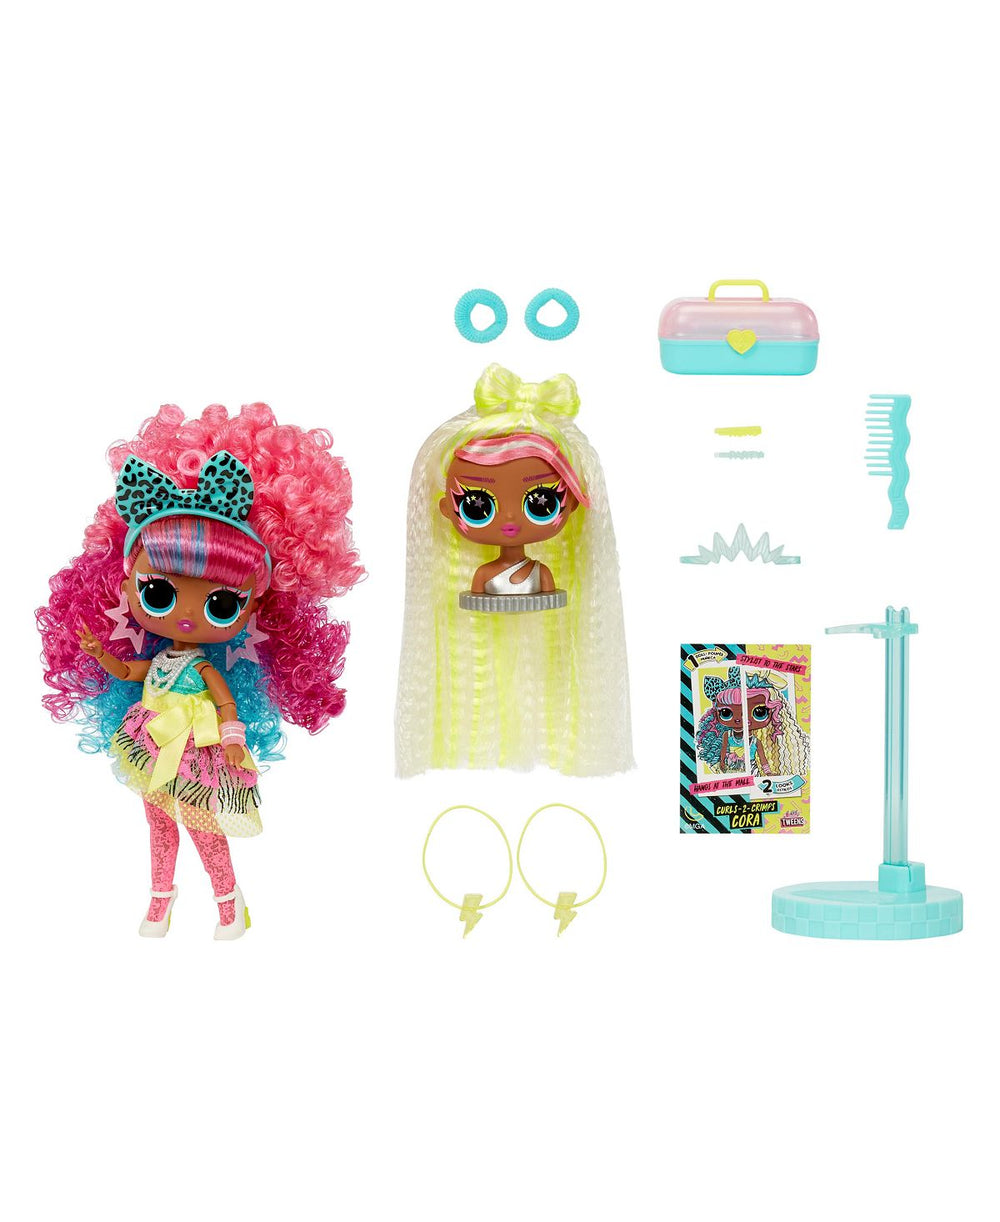 LOL Surprise! Tweens Surprise Swap Fashion Doll - Crimps Cora with Dual Hairstyles